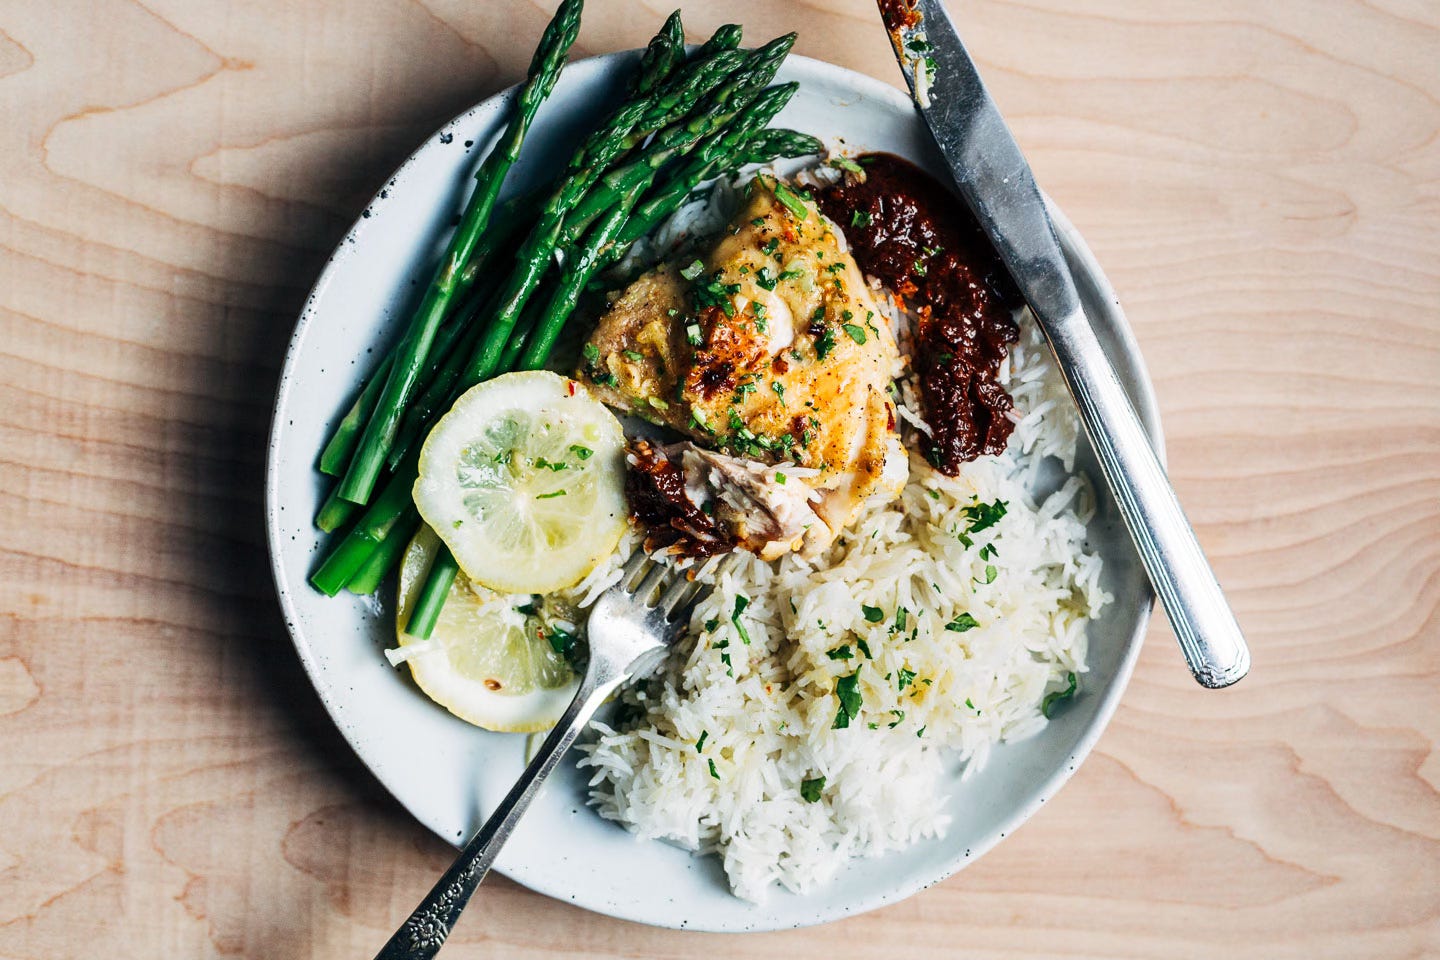 A plate with chicken, rice, and asparagus.